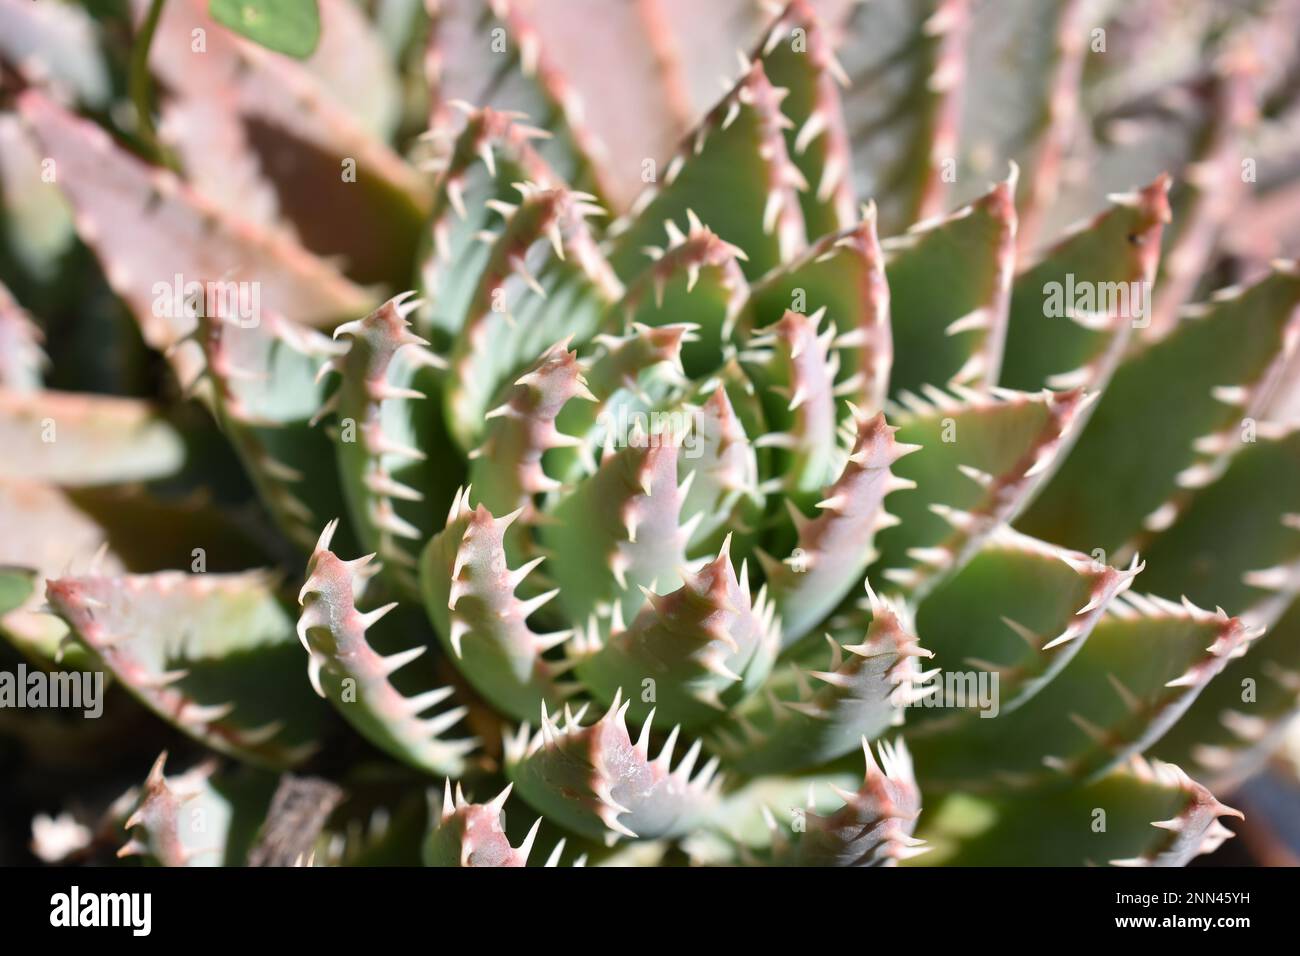 The green and pink succulent plant Aloe erinacea close up Stock Photo